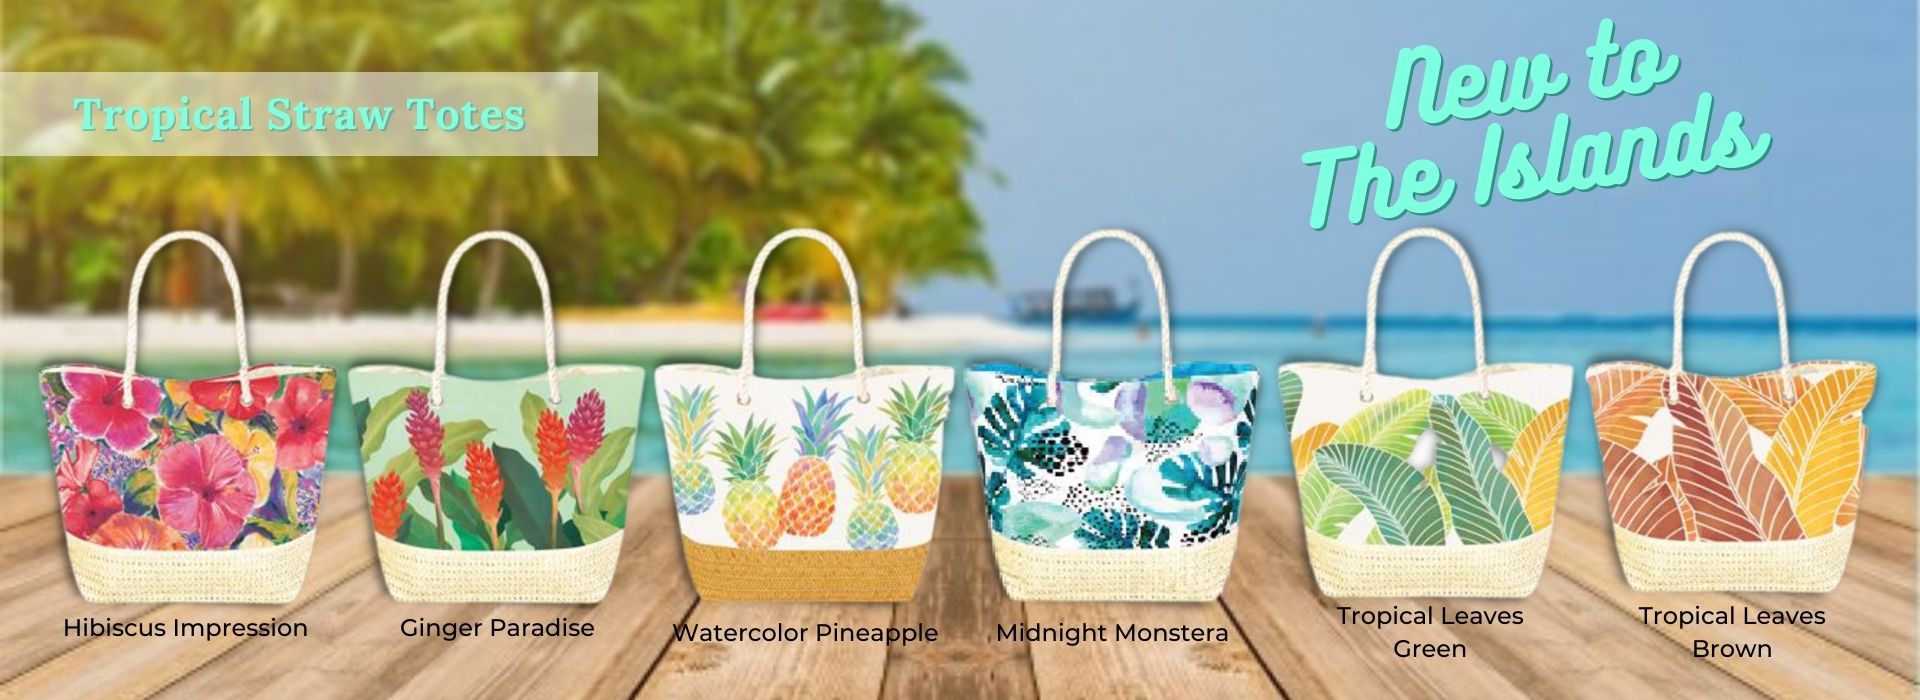 Tropical Straw Totes